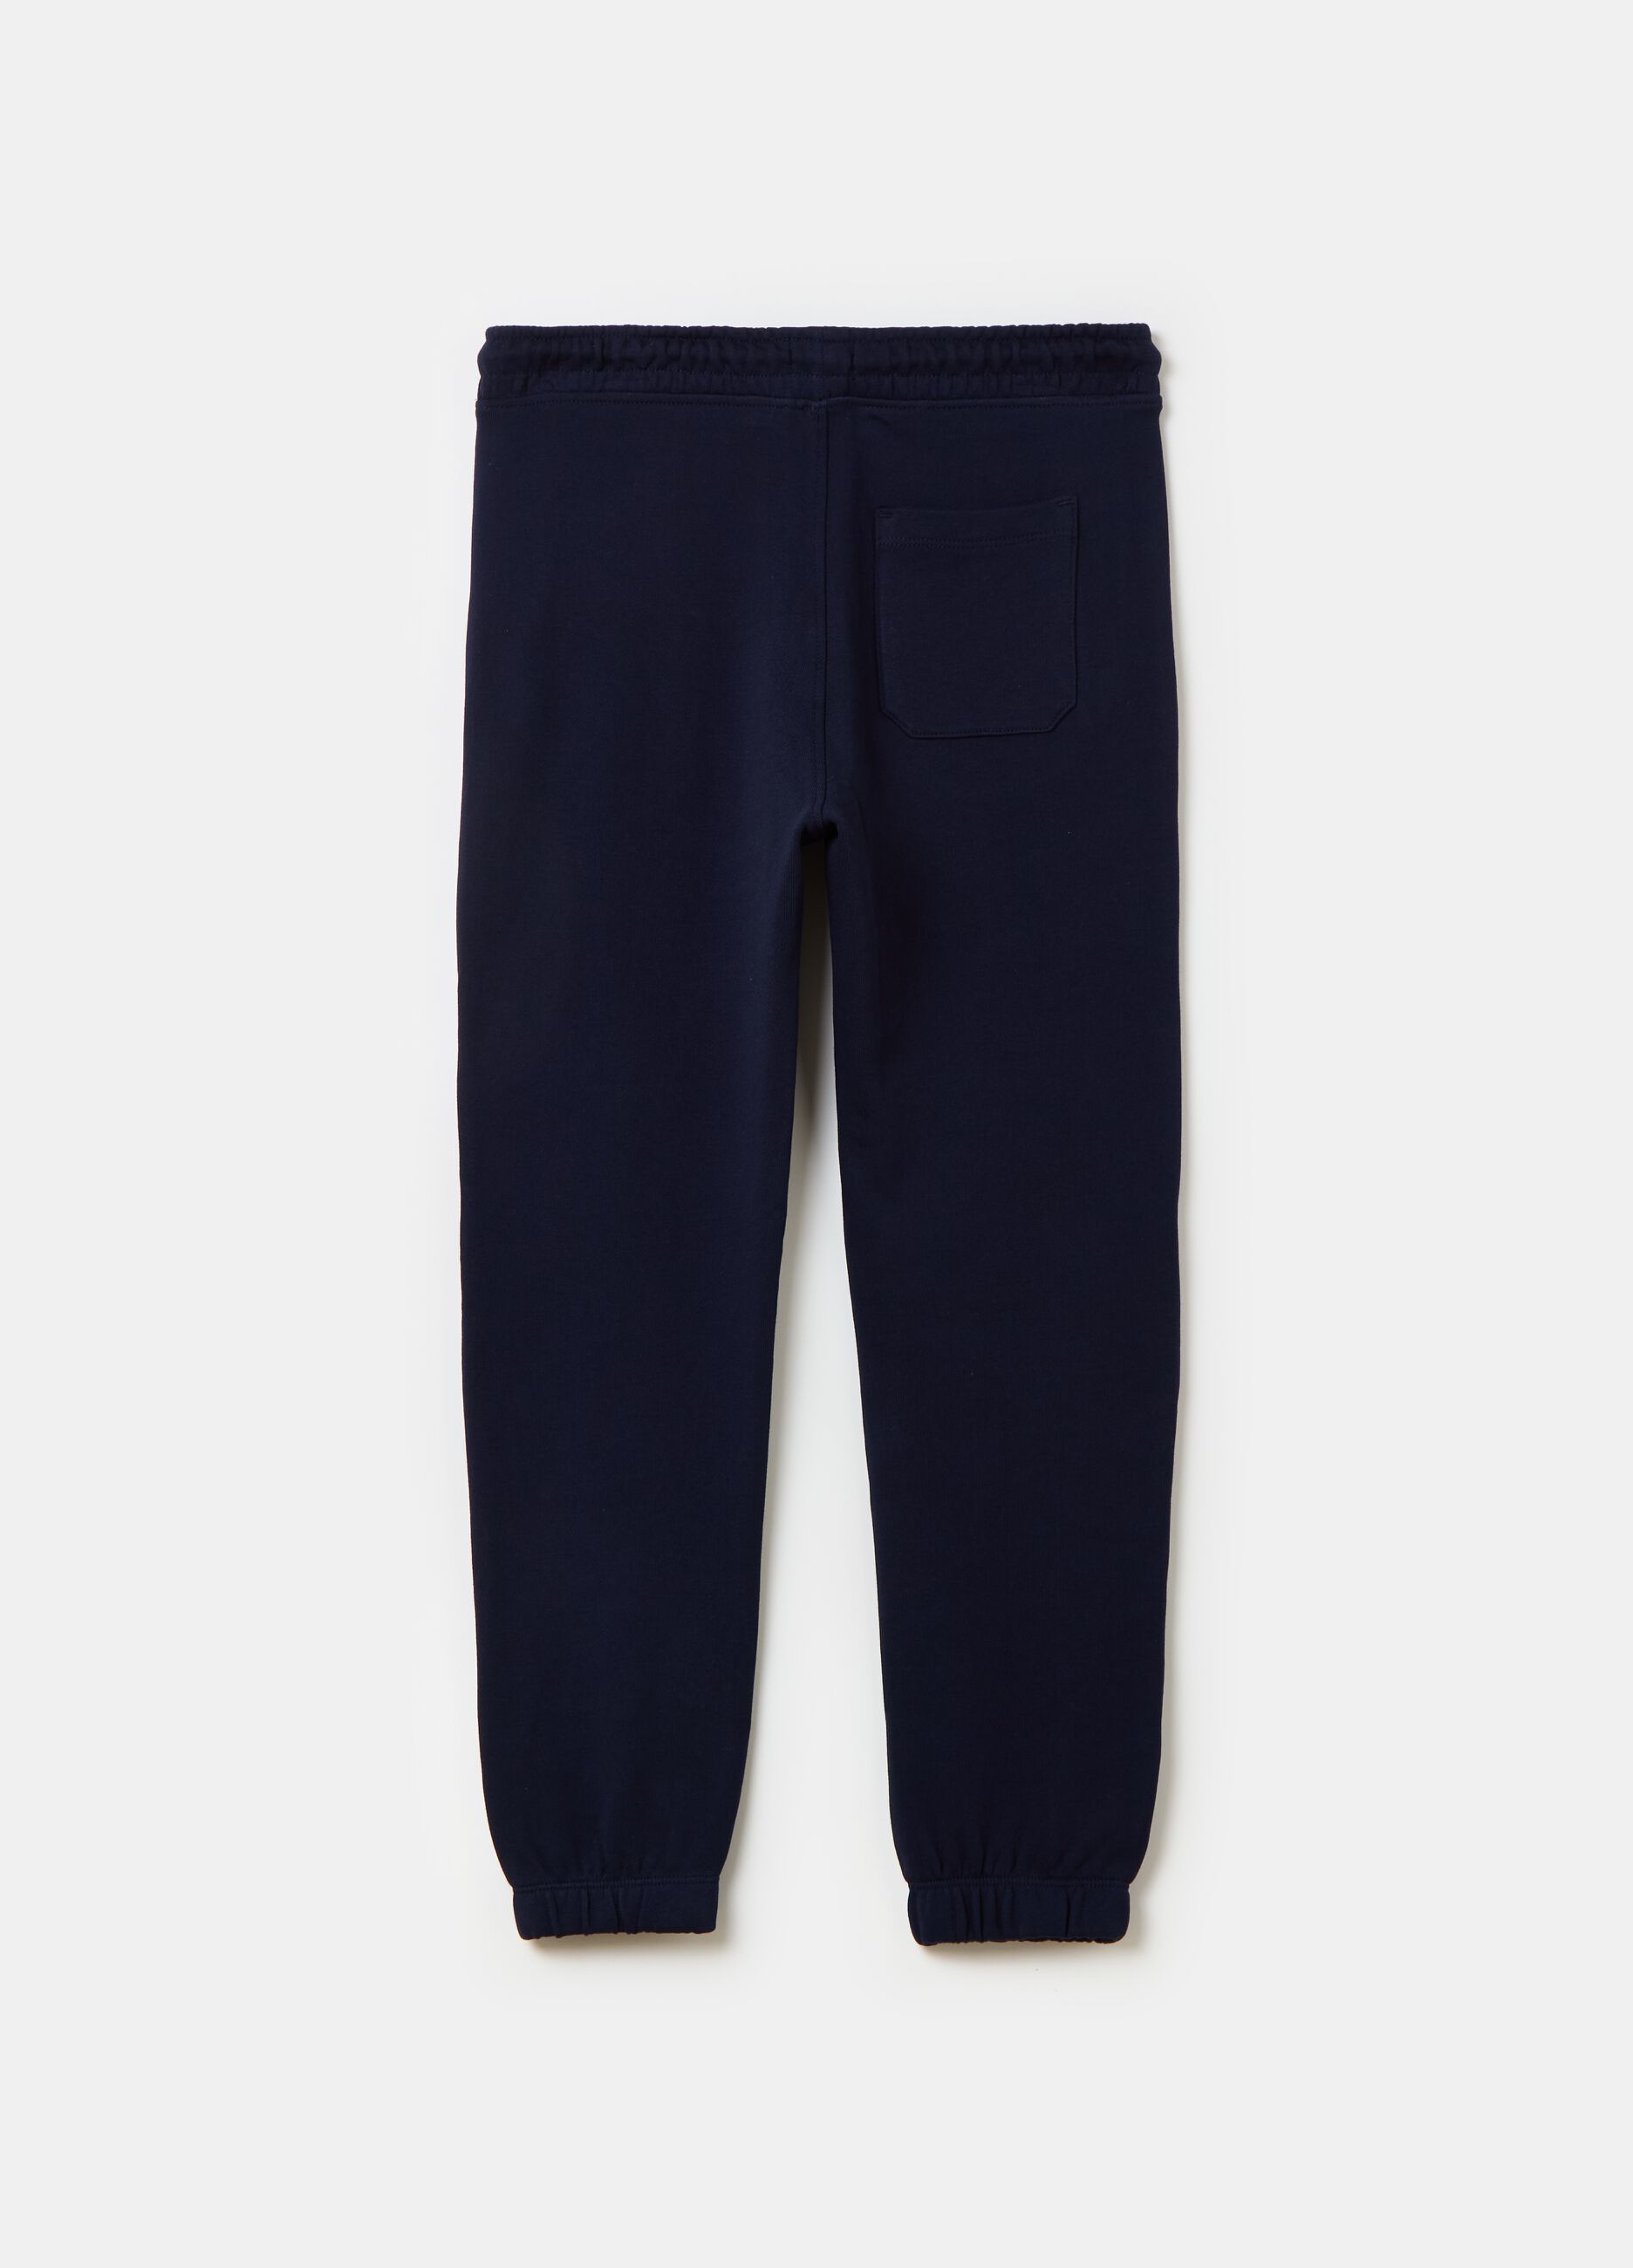 Essential joggers in 100% organic cotton with drawstring